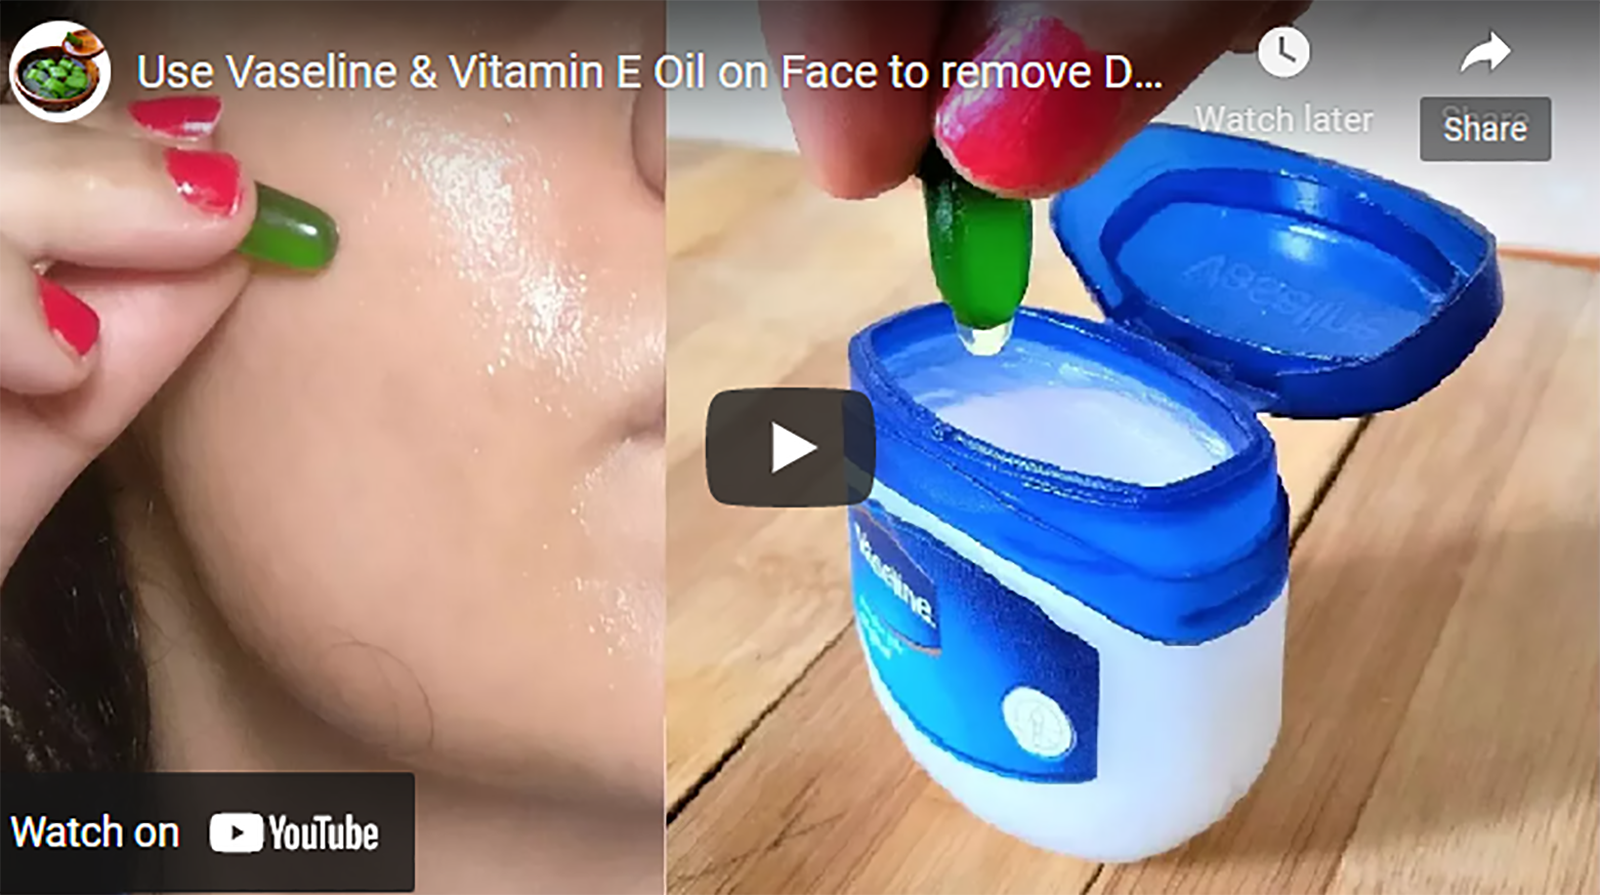 Watch: How To Use Vaseline & Vitamin E Oil On Your Face To Remove Dark Spots 1